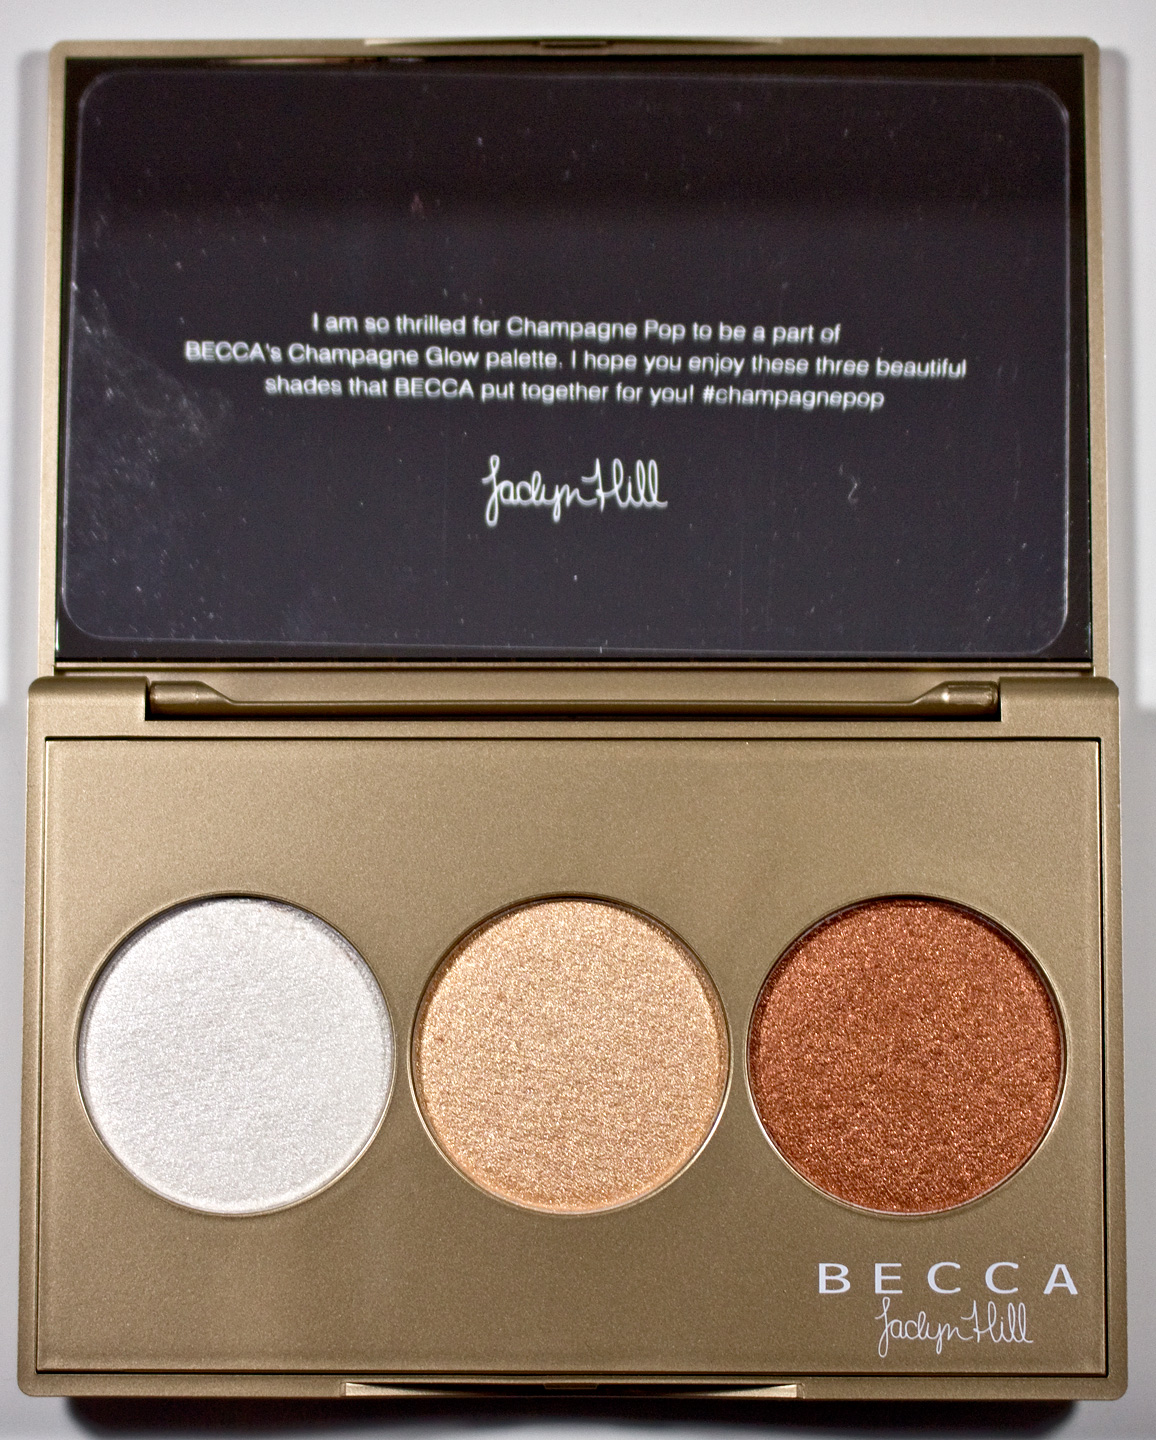 ubemandede Kompatibel med Cornwall WARPAINT and Unicorns: BECCA Shimmering Skin Perfector Pressed Champagne  Glow Palette in Pearl, Champagne Pop, & Blushed Copper : Swatches & Review